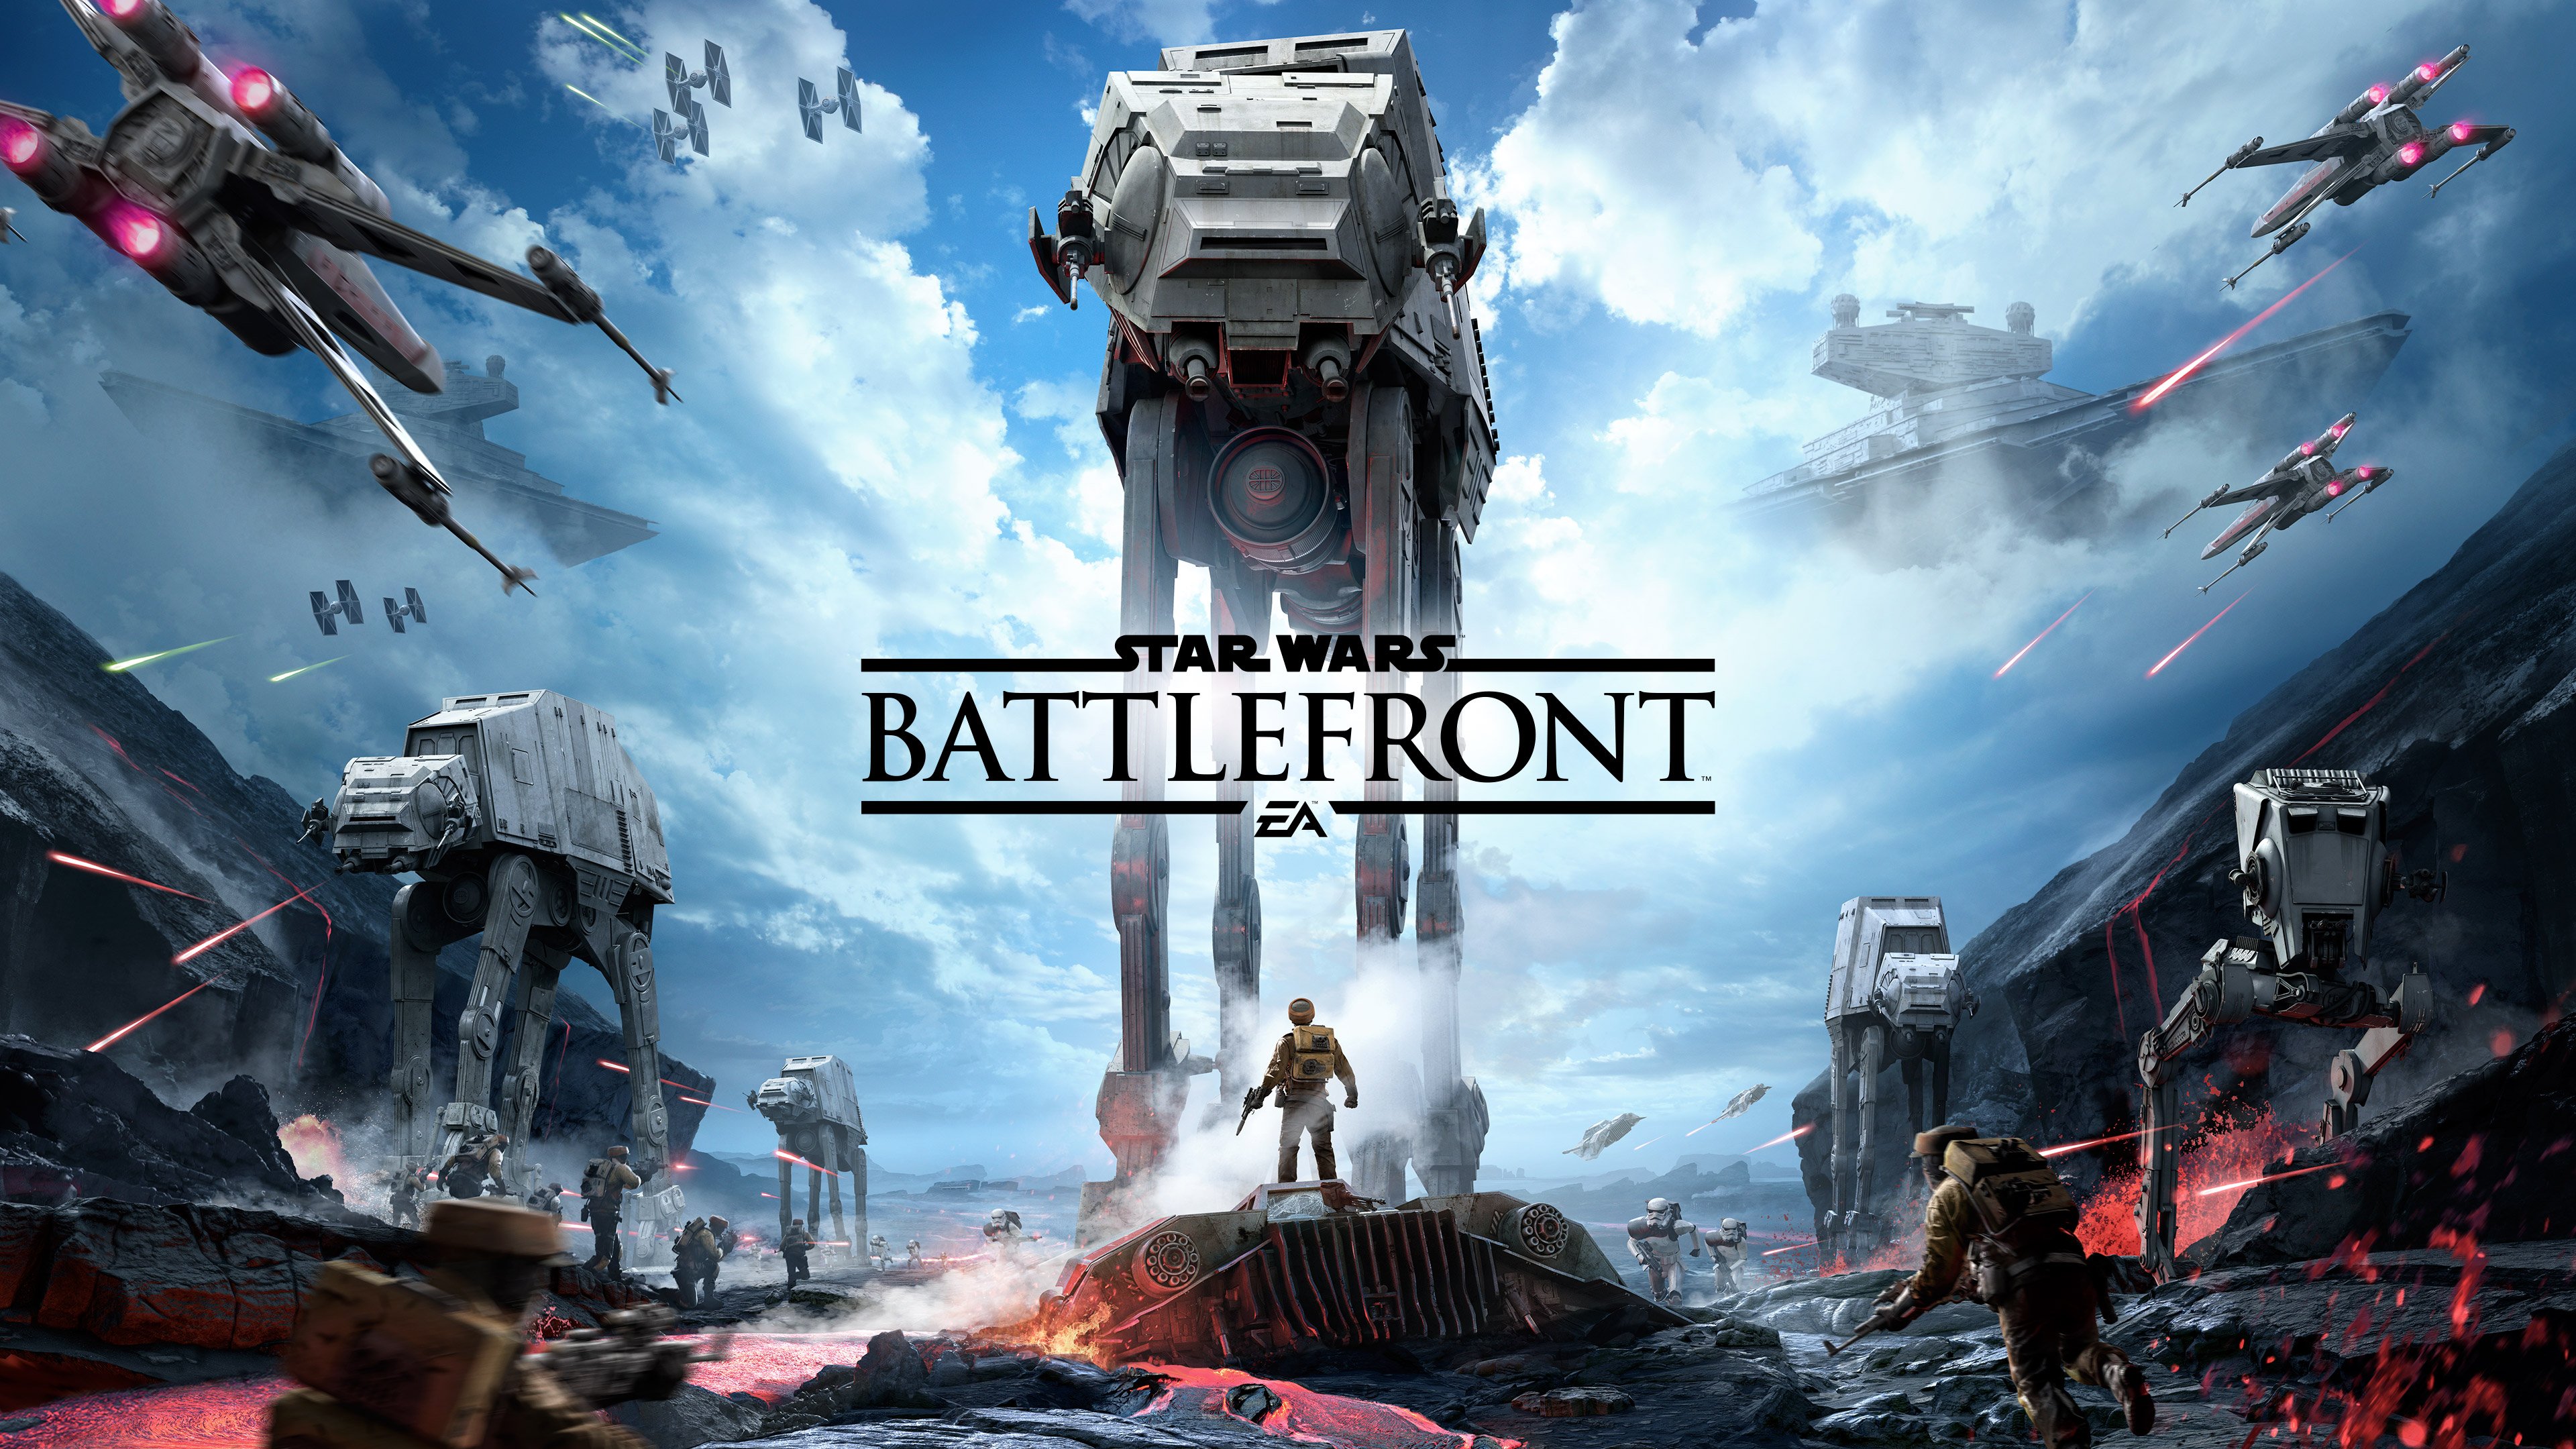 Star Wars Battlefront Wallpapers   Star Wars   Official EA Site 3840x2160